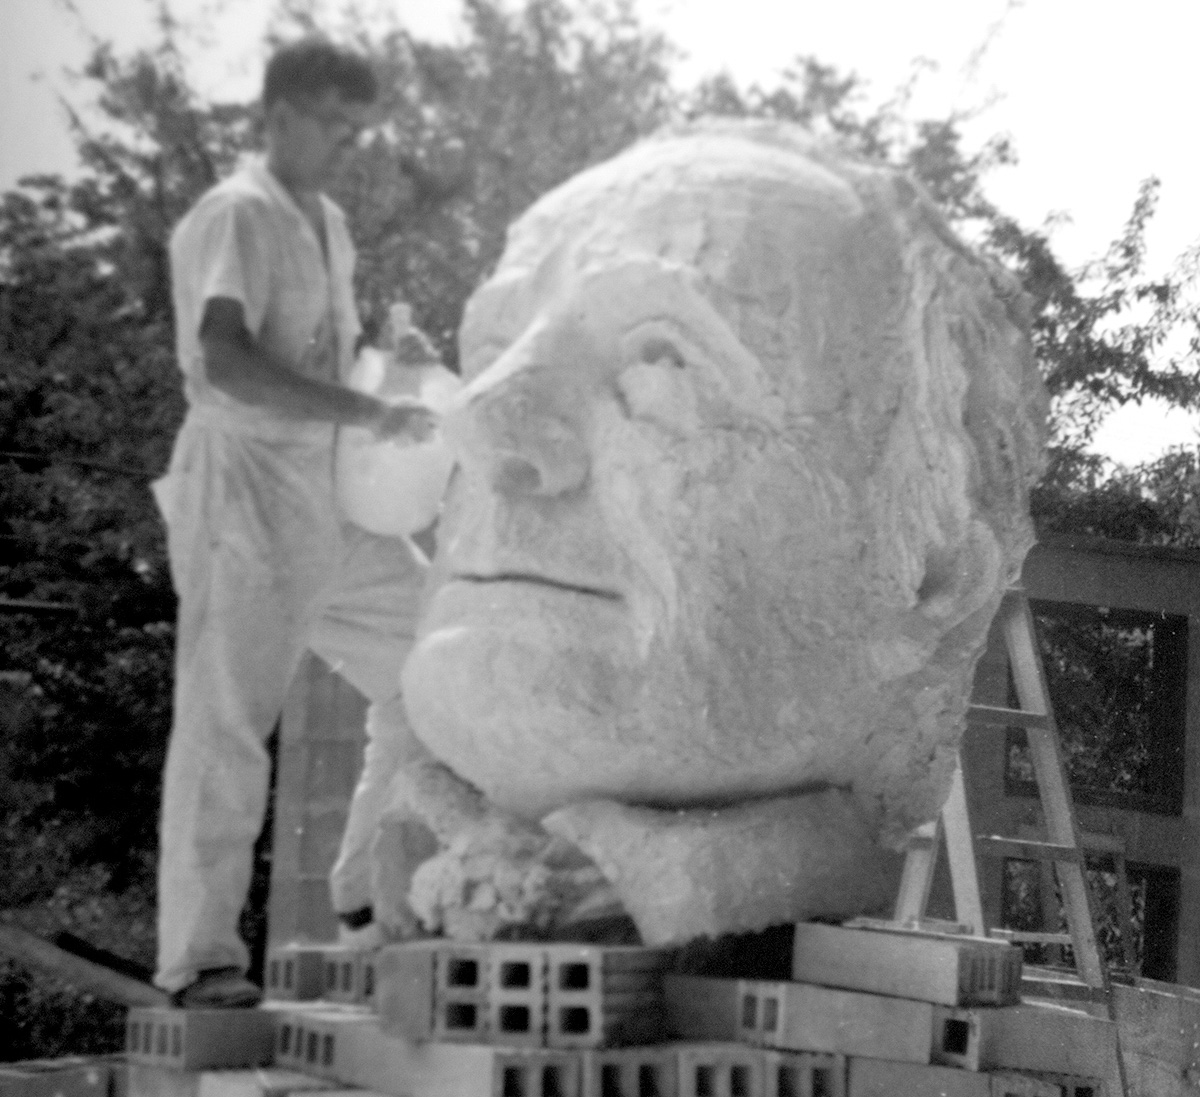 David Cargill works on the statue of Mirabeau B. Lamar, far left, which sits in the Quad at Lamar University.